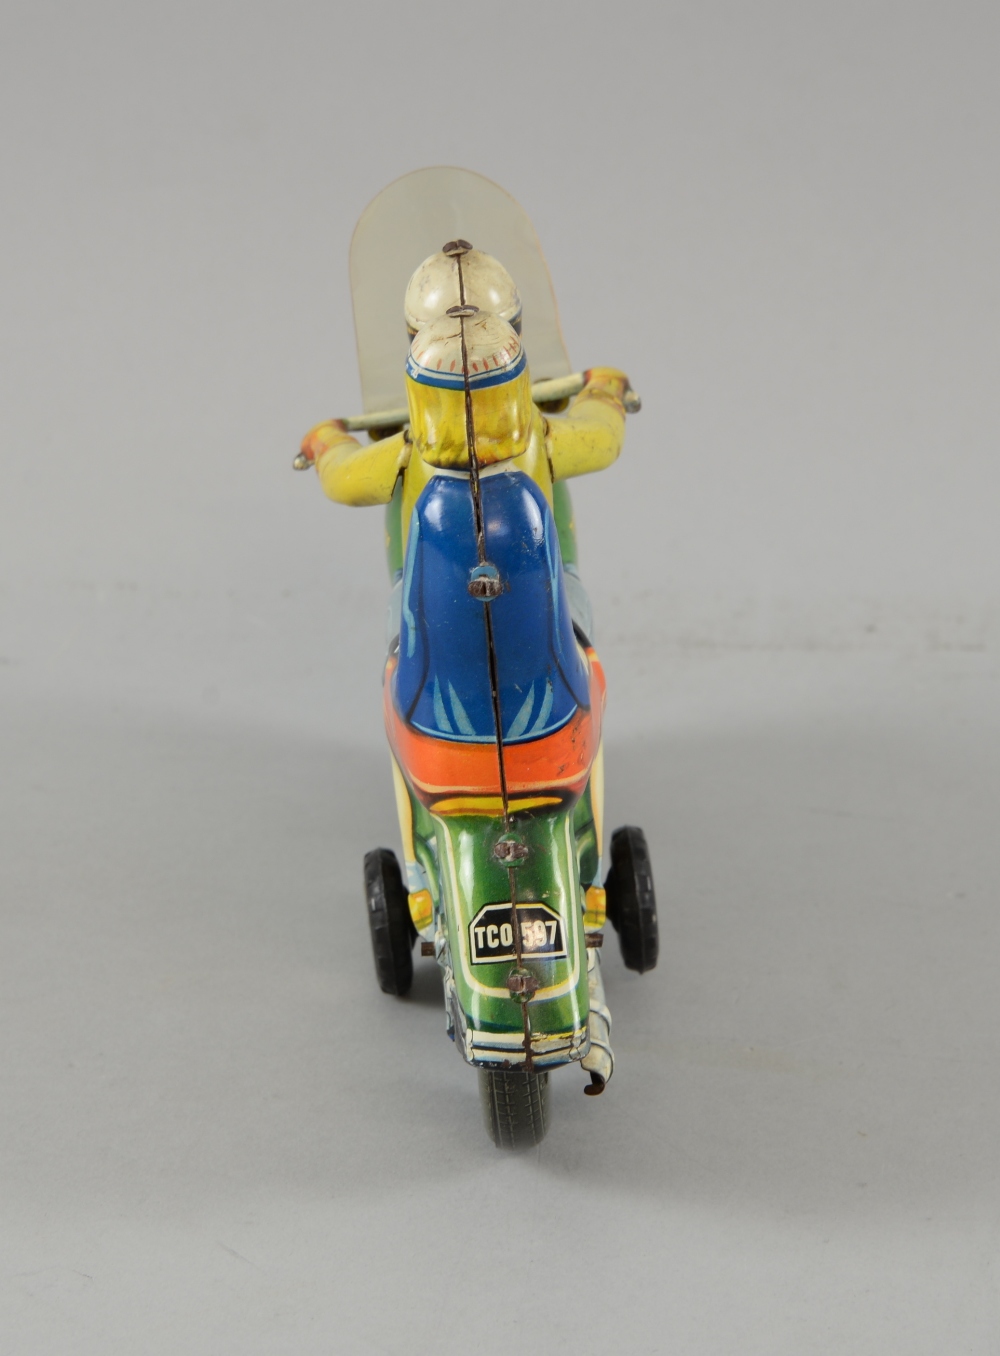 Tippco, Germany , tinplate, 1950s Harley Davidson friction driven motorcycle with rider and - Image 4 of 4